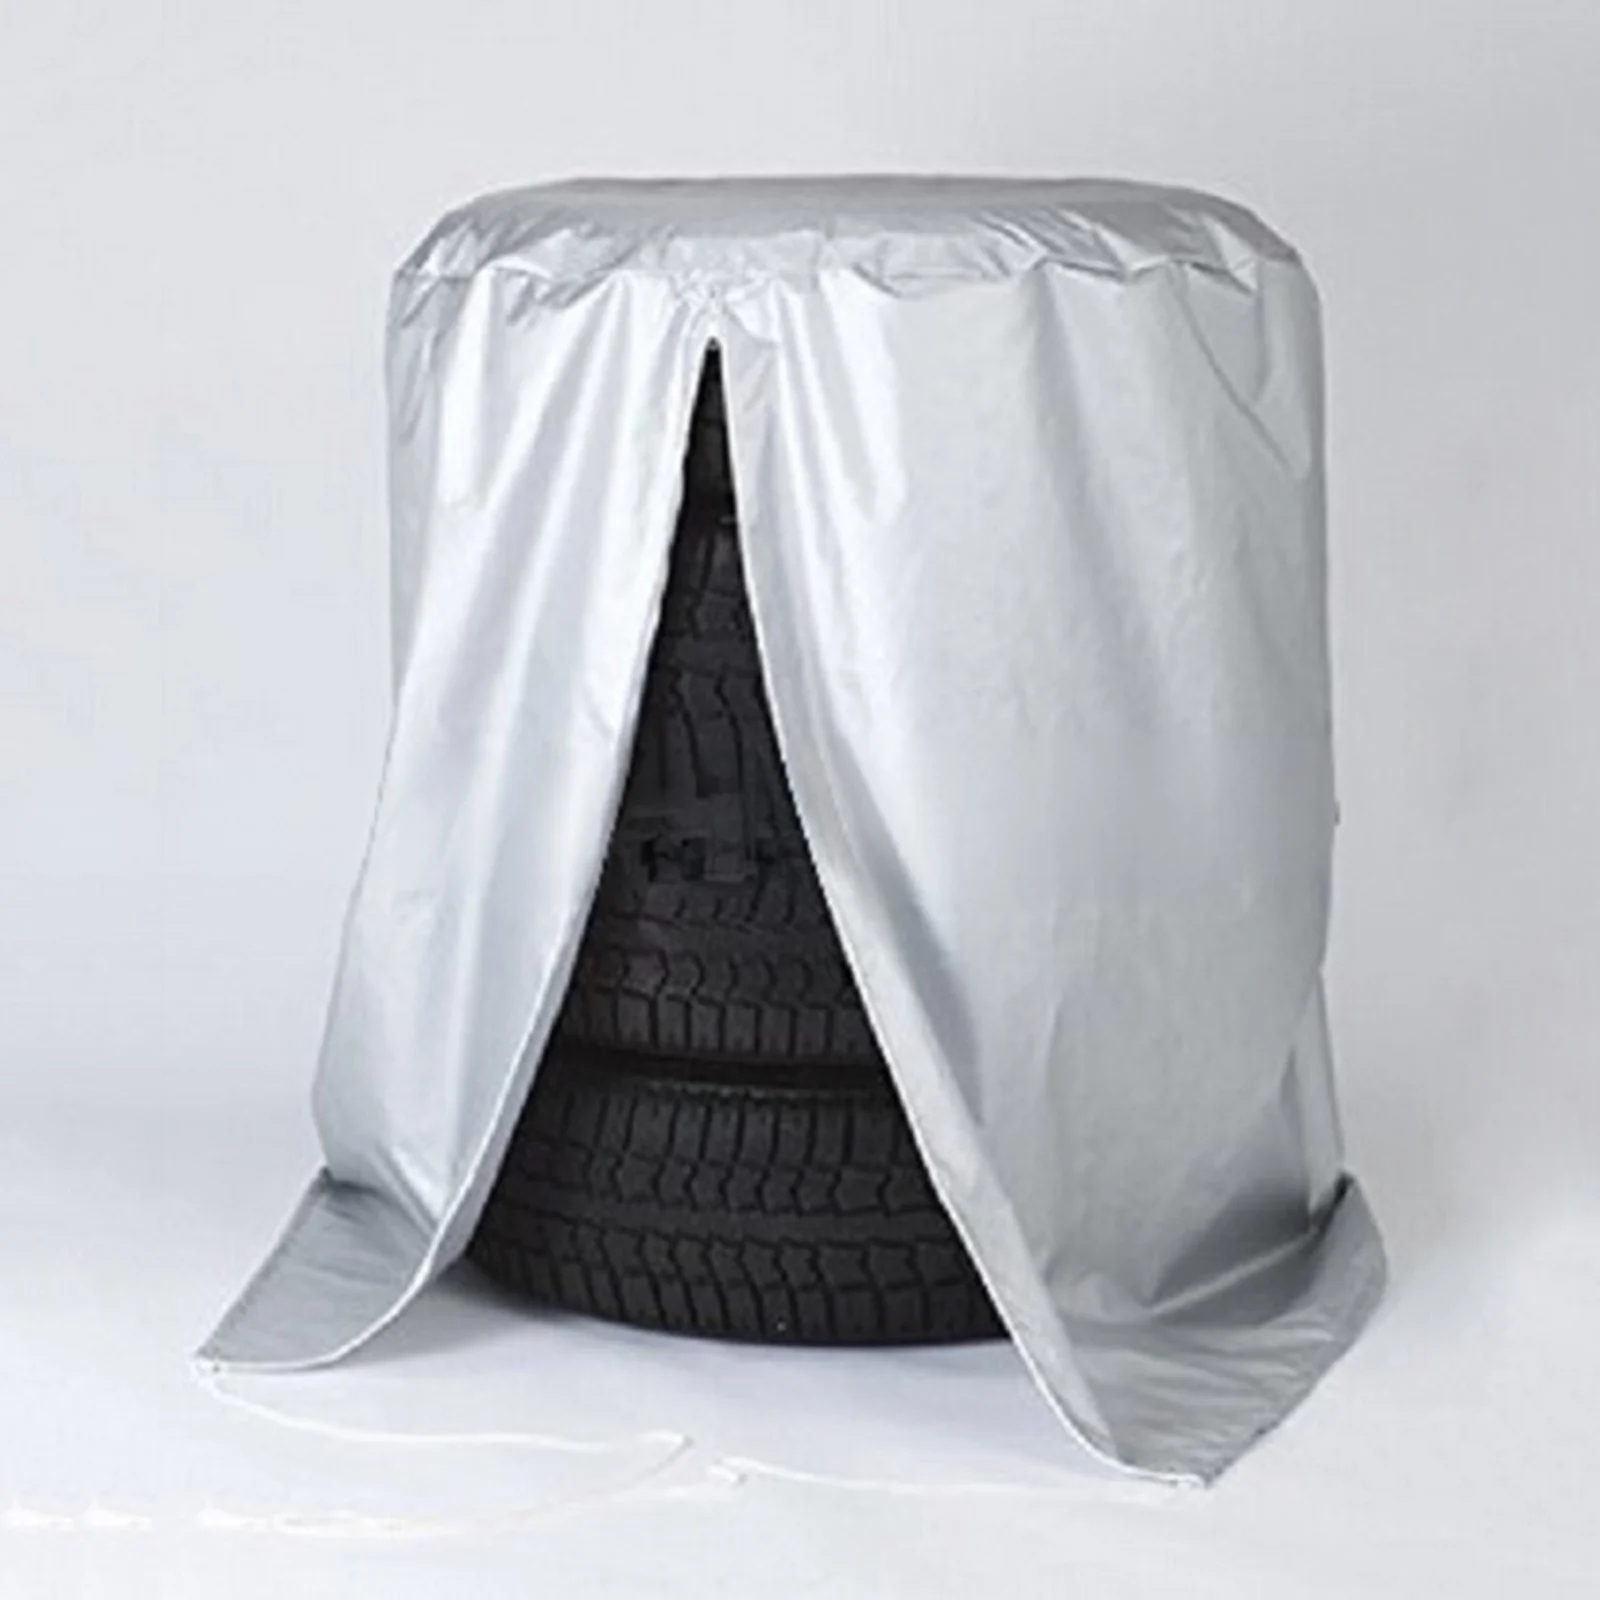 Tire Storage Cover 4 Tires Stacked Adjustable Spare Tire Cover Fits for 32.2 inch Tyre